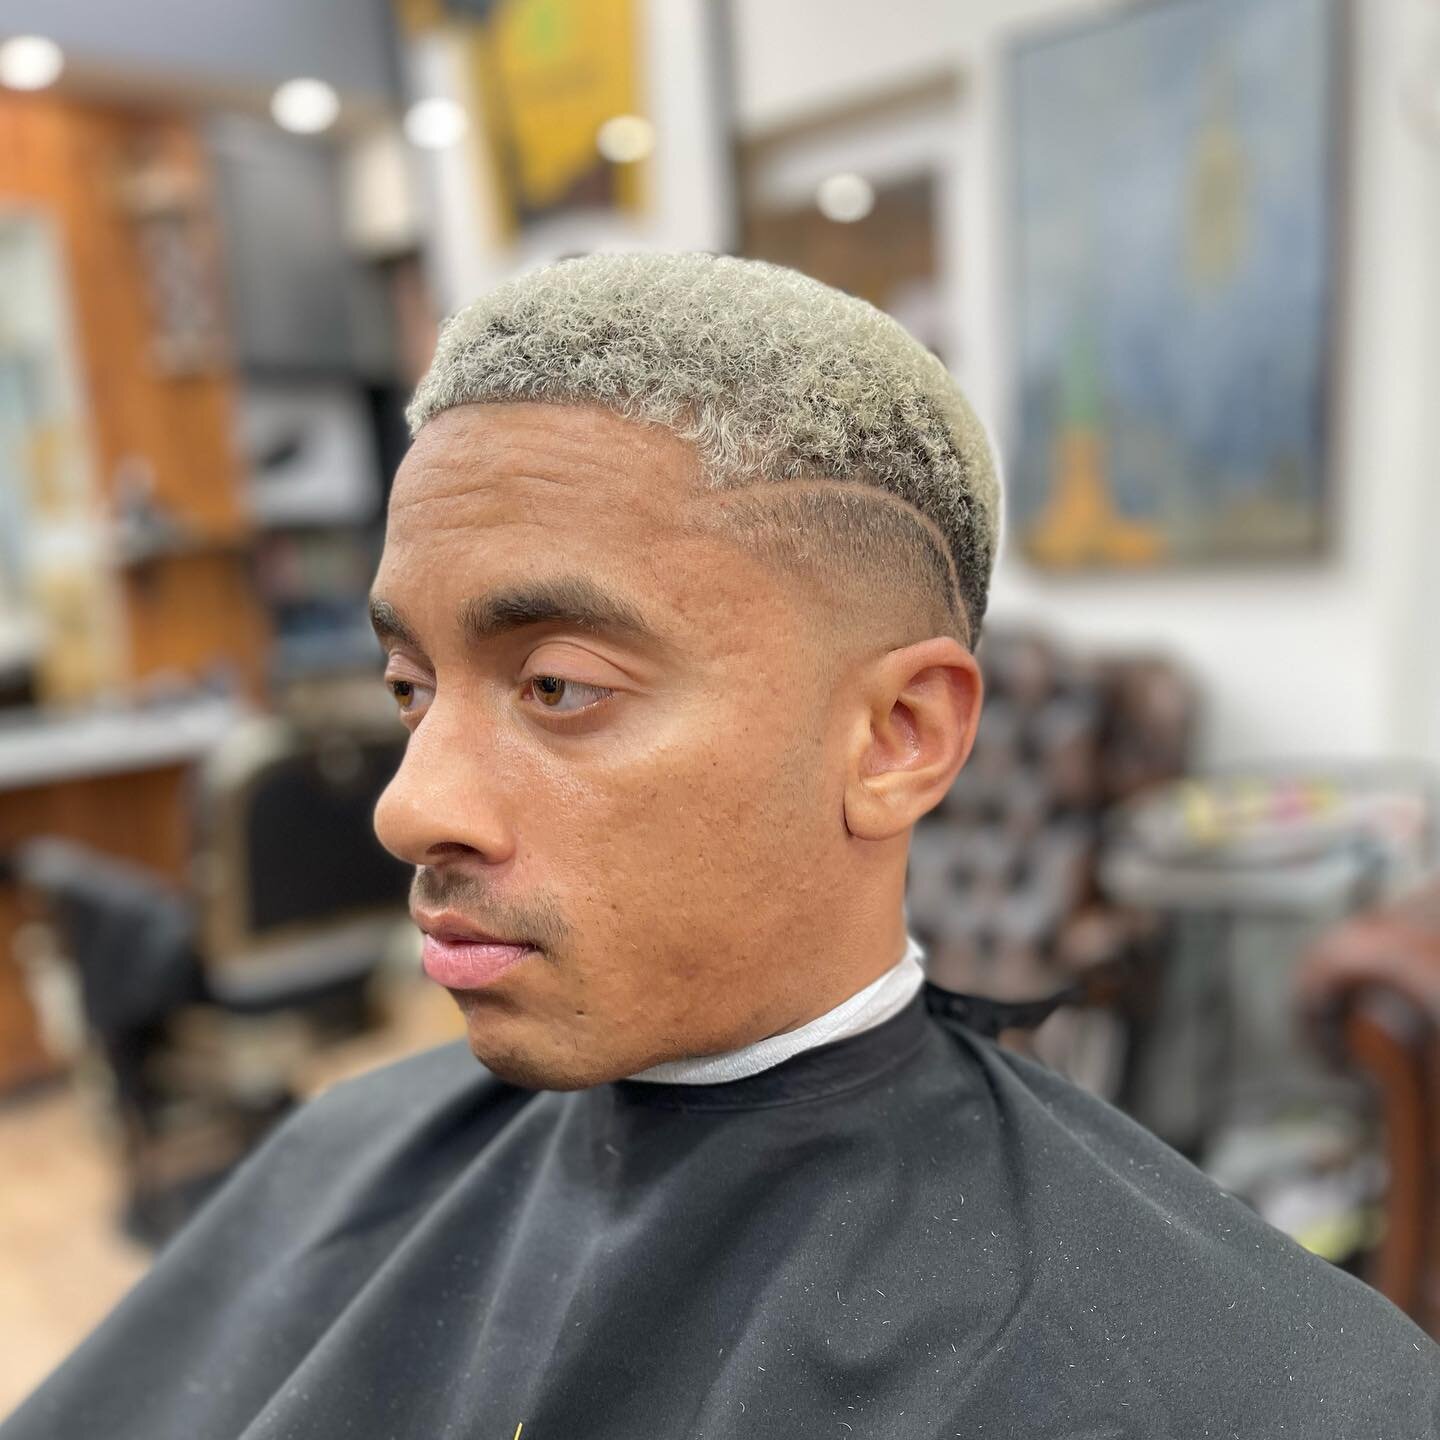 Like a fine watch, a good haircut is timeless 🔥
⠀
If you haven't tried Empire State Barbershop yet then come check us out!

Make sure you book in early - we have limited spots!